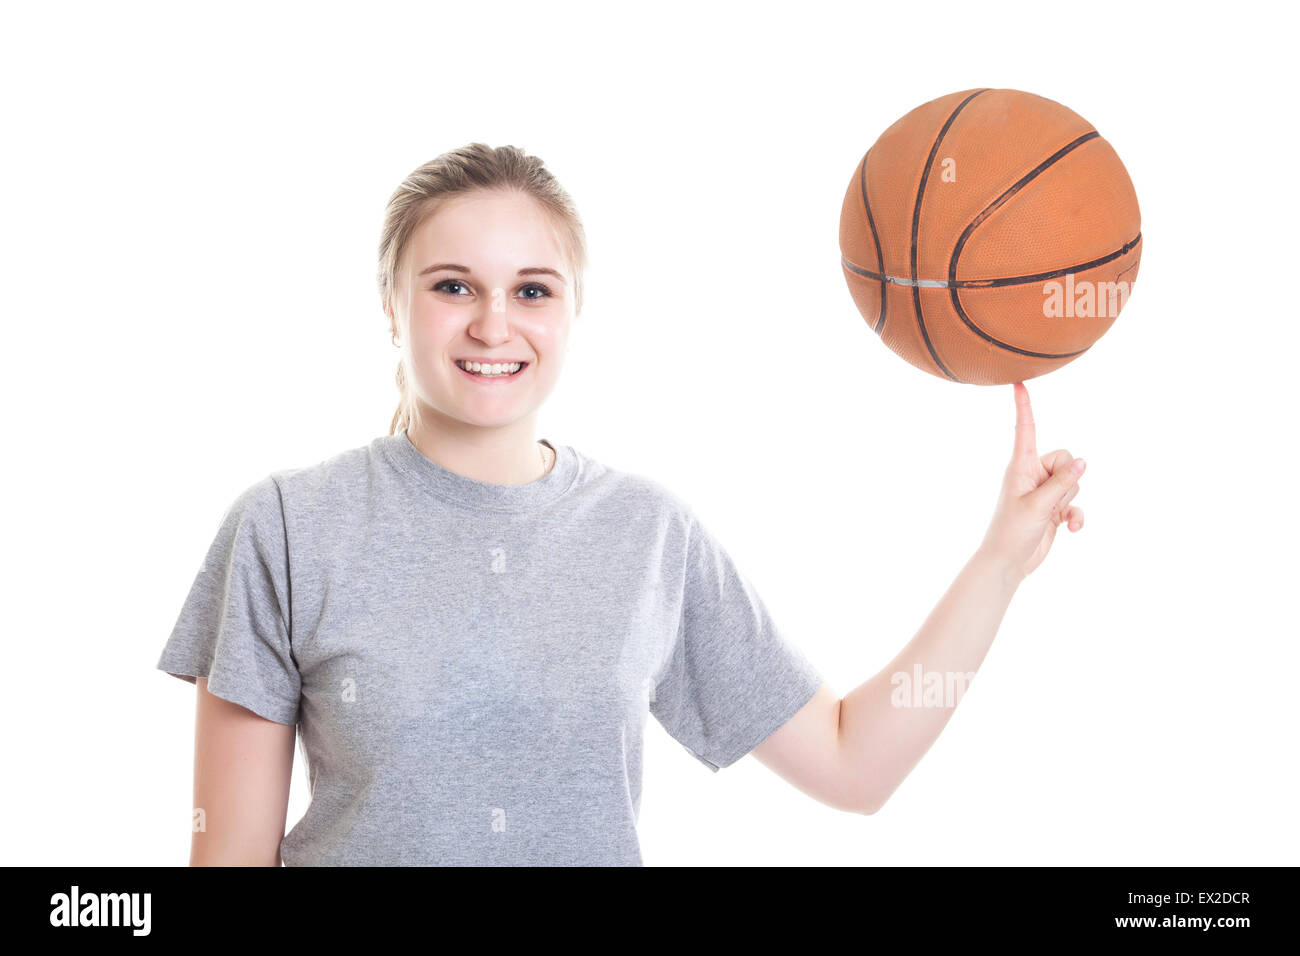 Portrait of a teen with basket ball Stock Photo